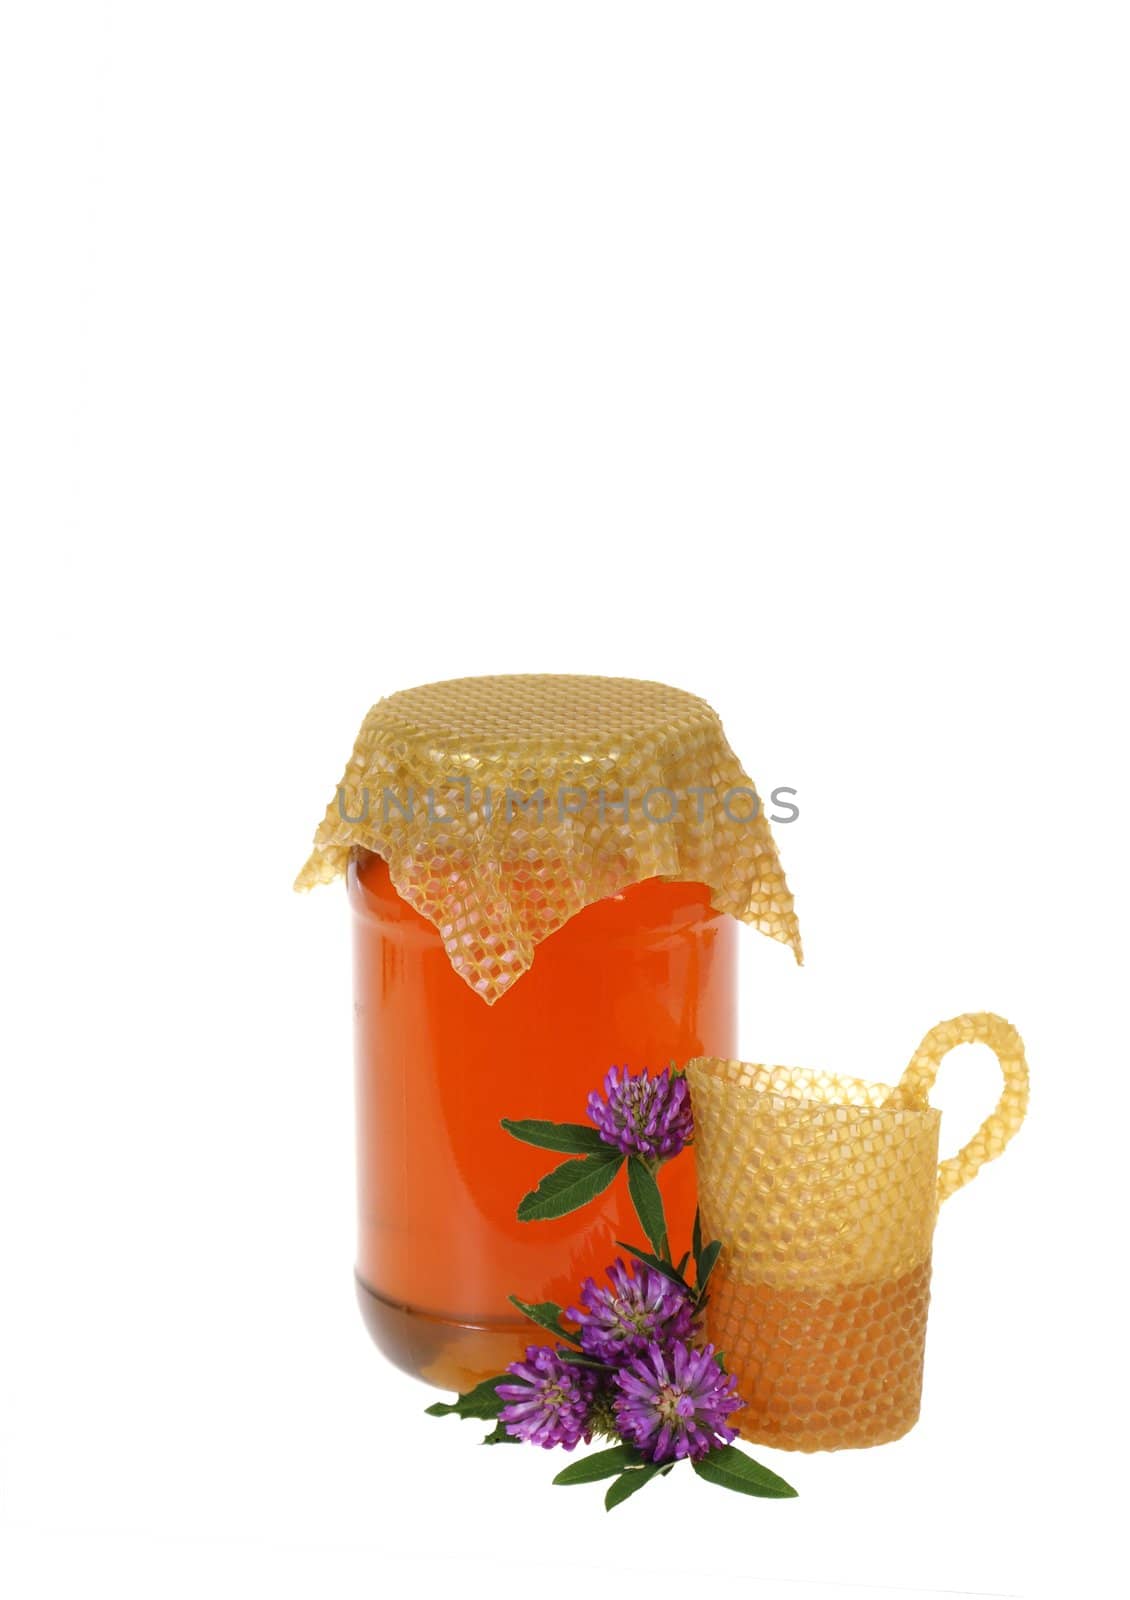 honey in jar with clover and jug isolated on white background